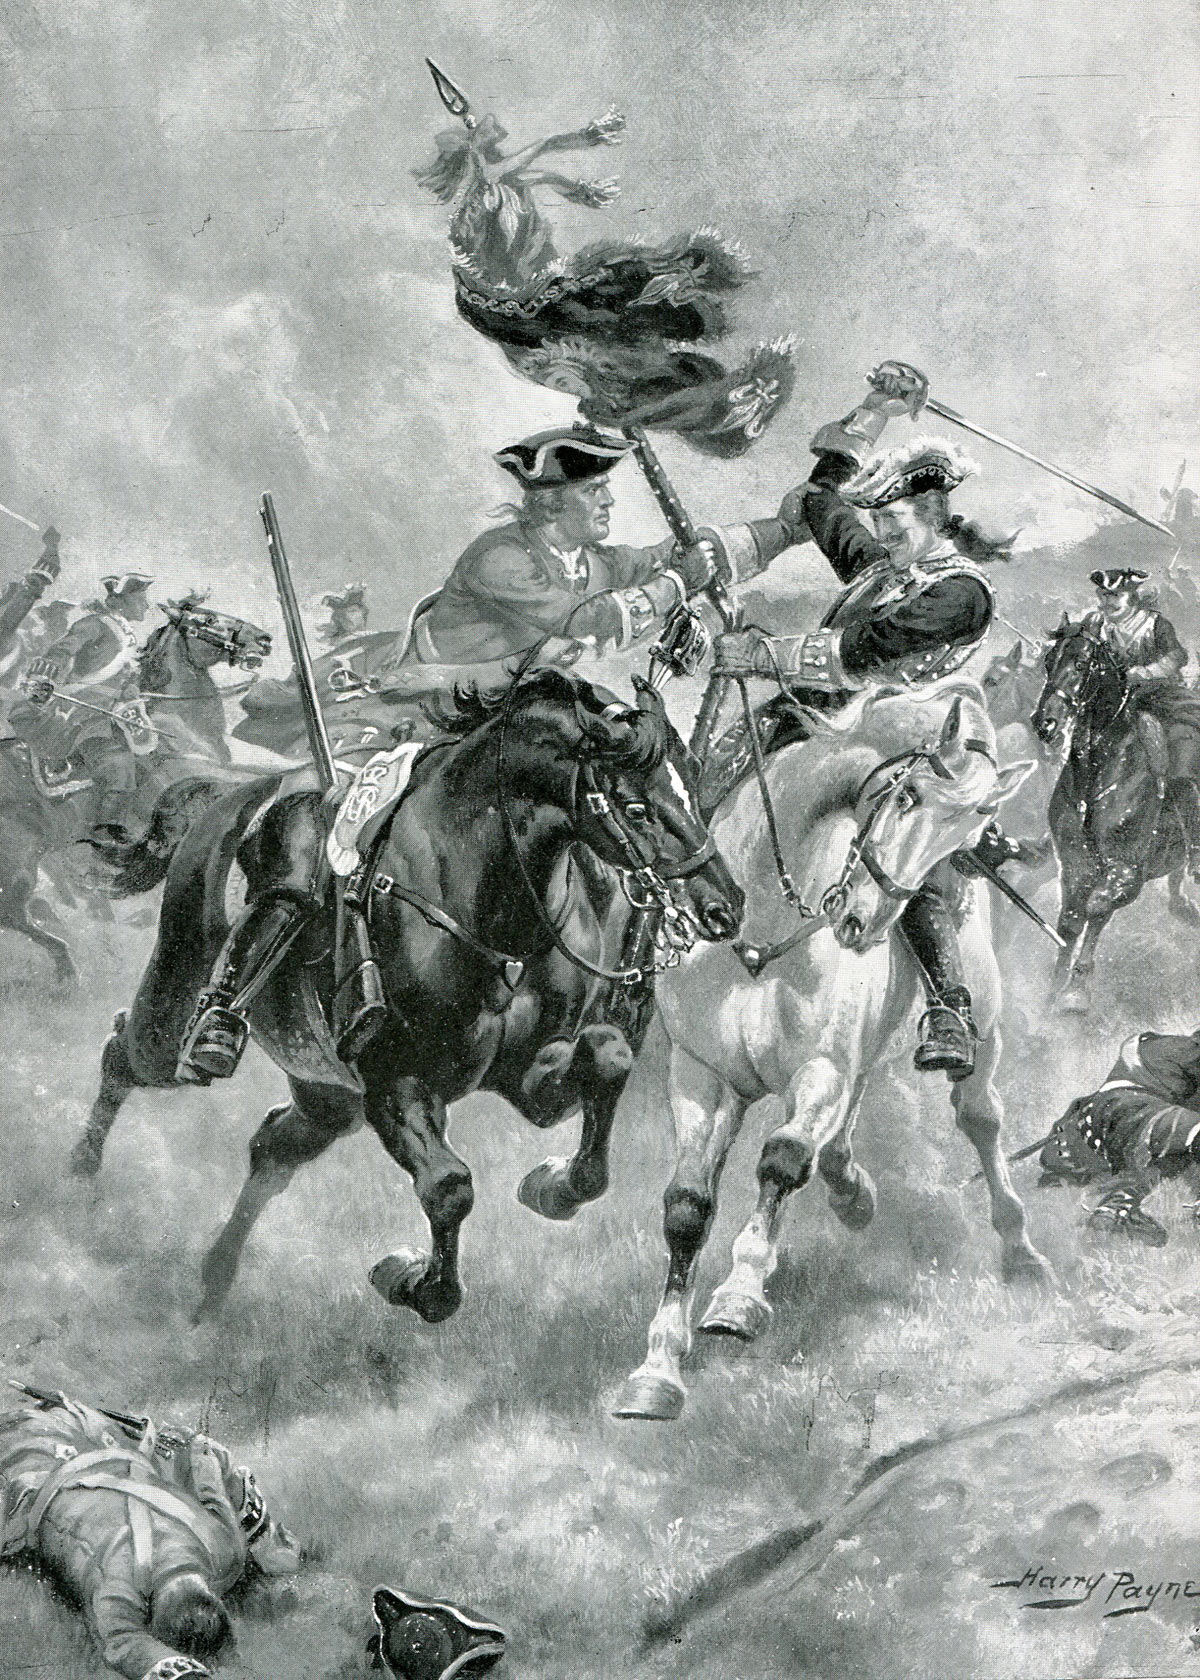 Battle of Blenheim 2nd August 1704 in the War of the Spanish Succession: picture by Harry Payne